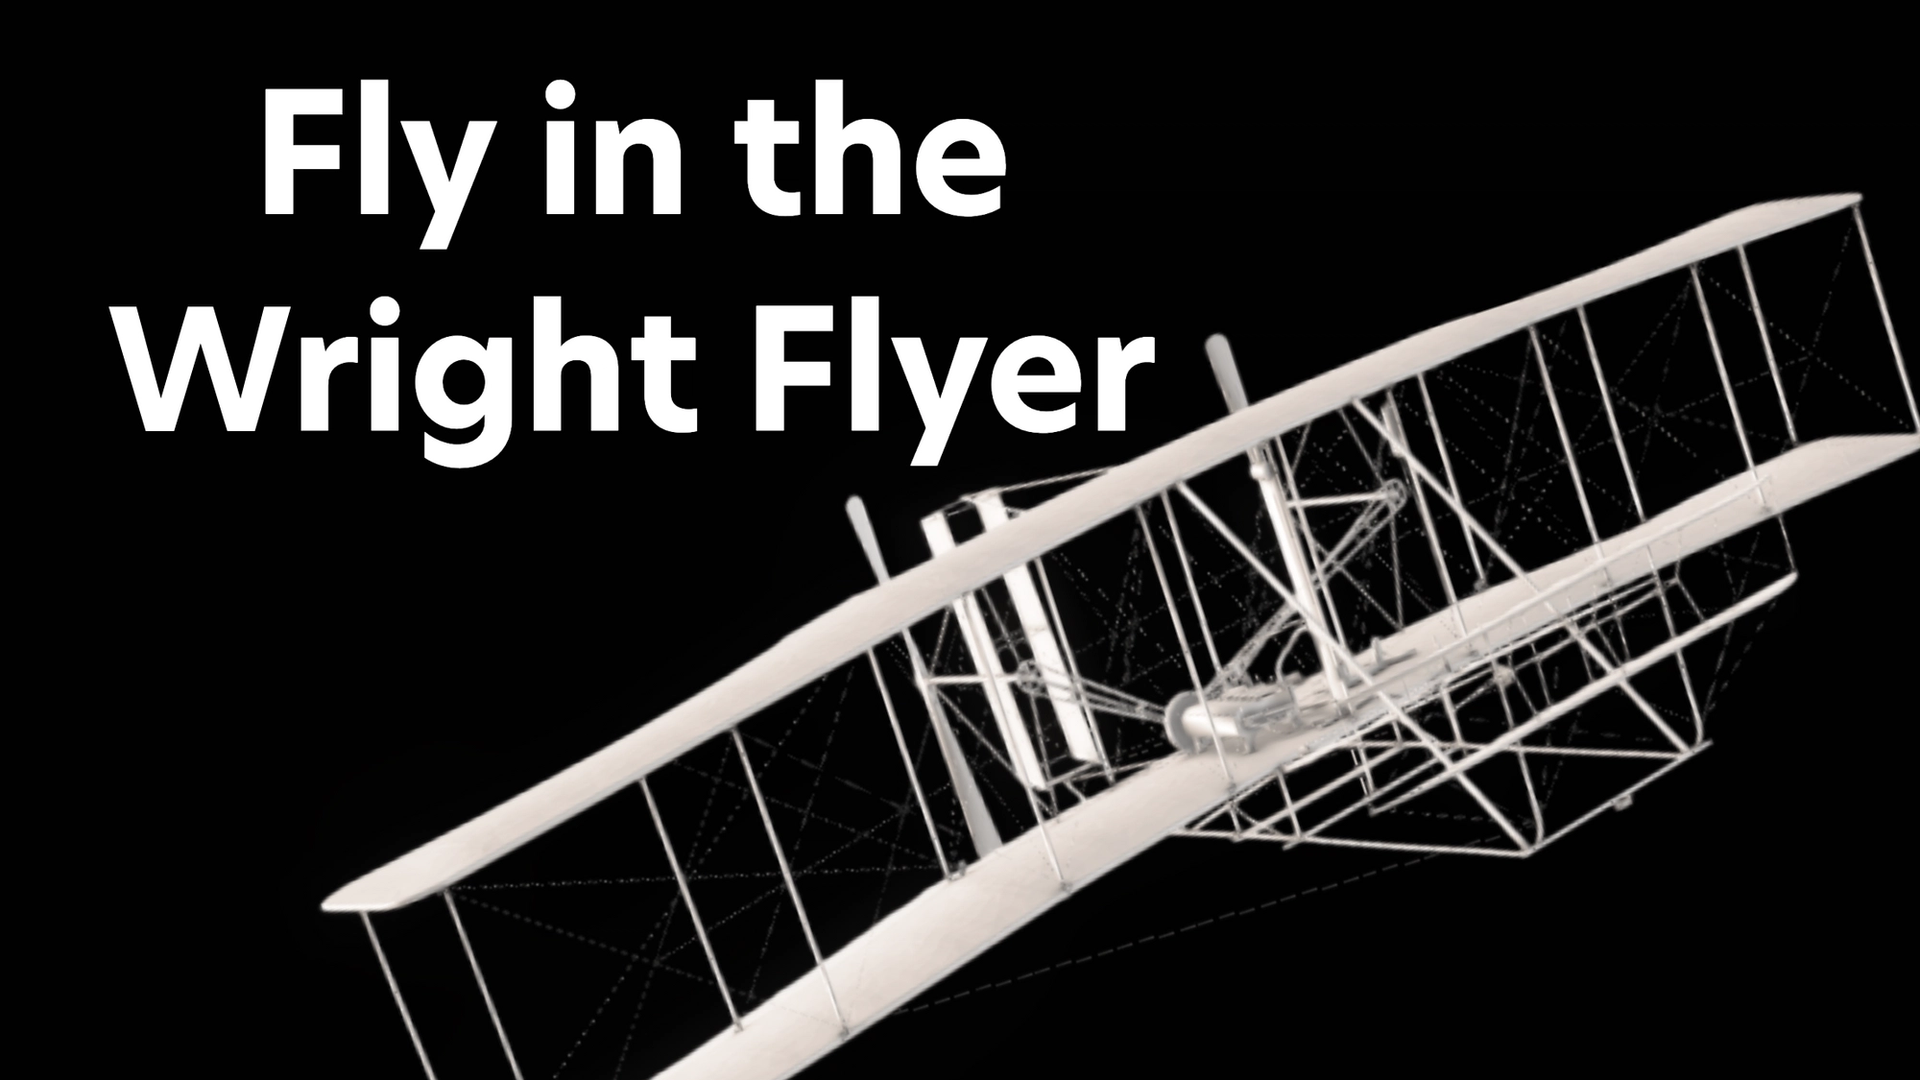 Fly in the Wright Flyer